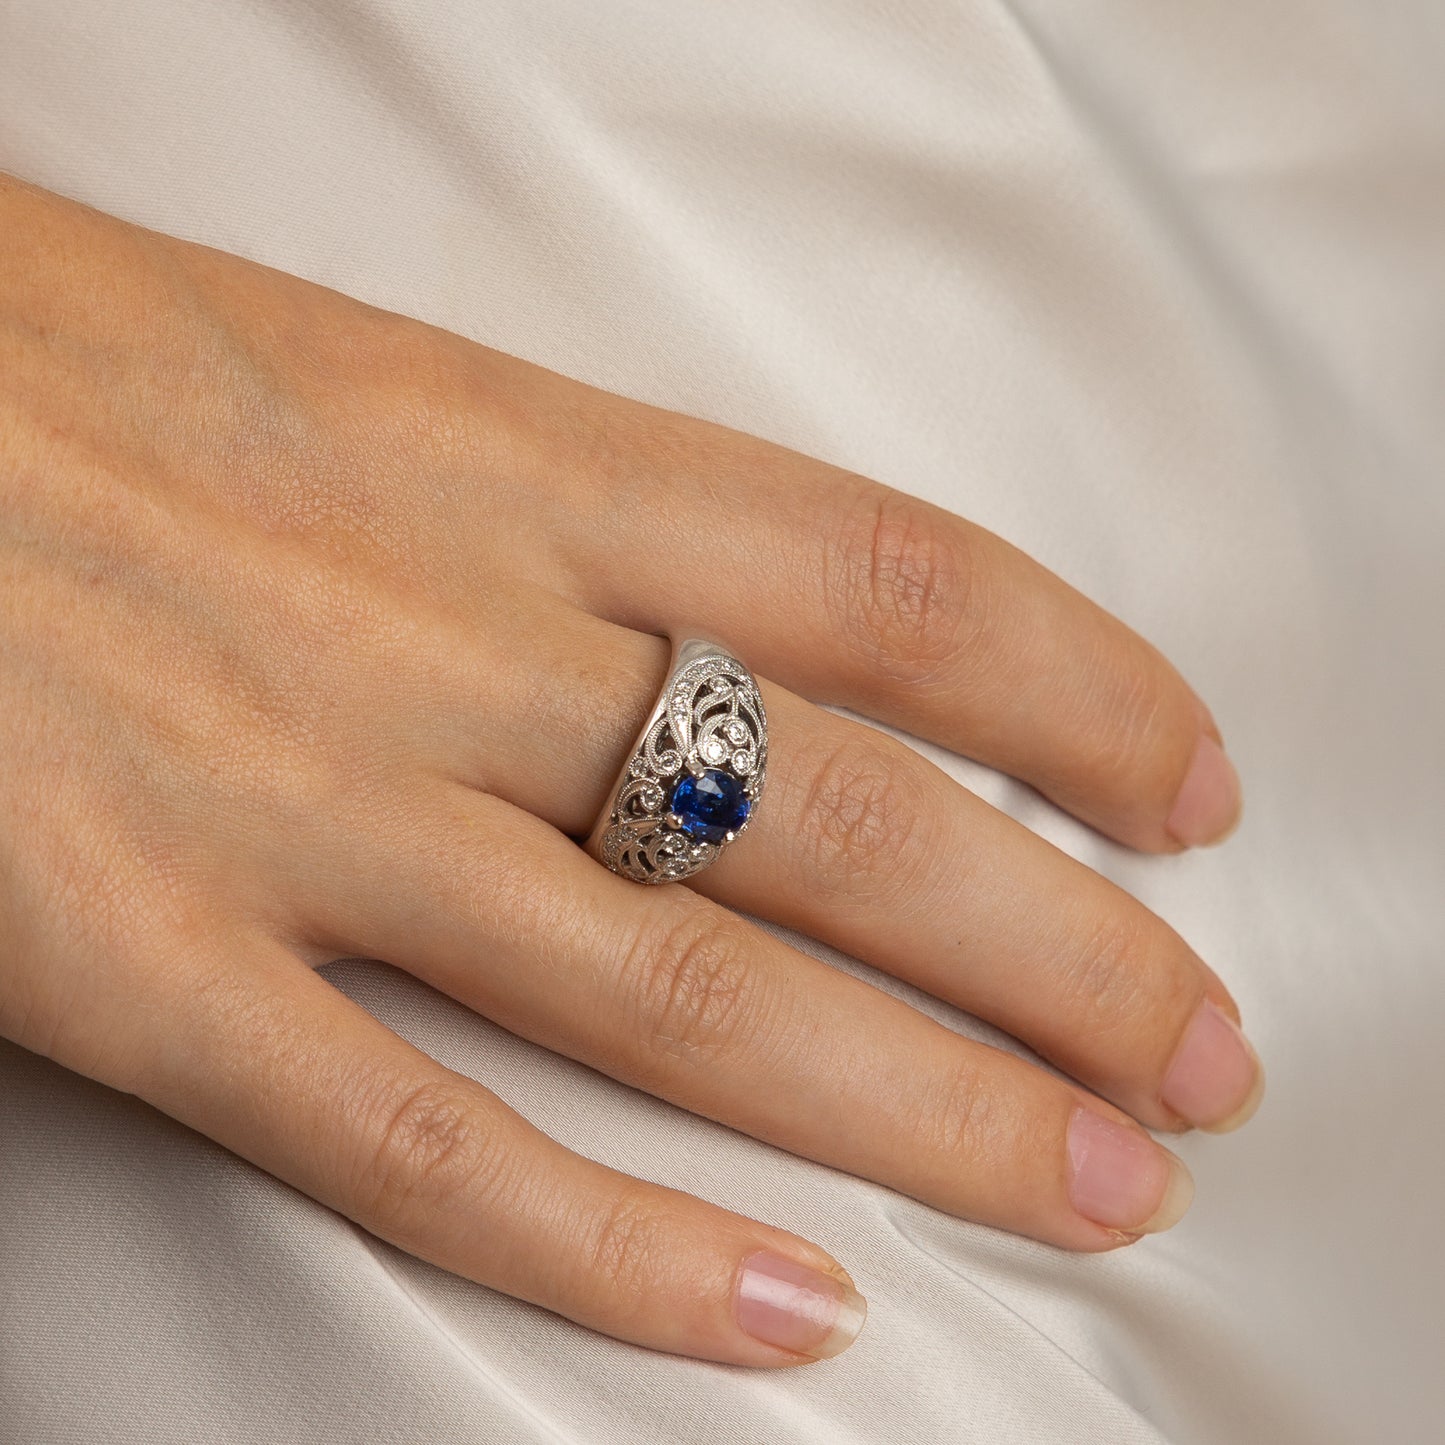 The Sapphire Dome Ring